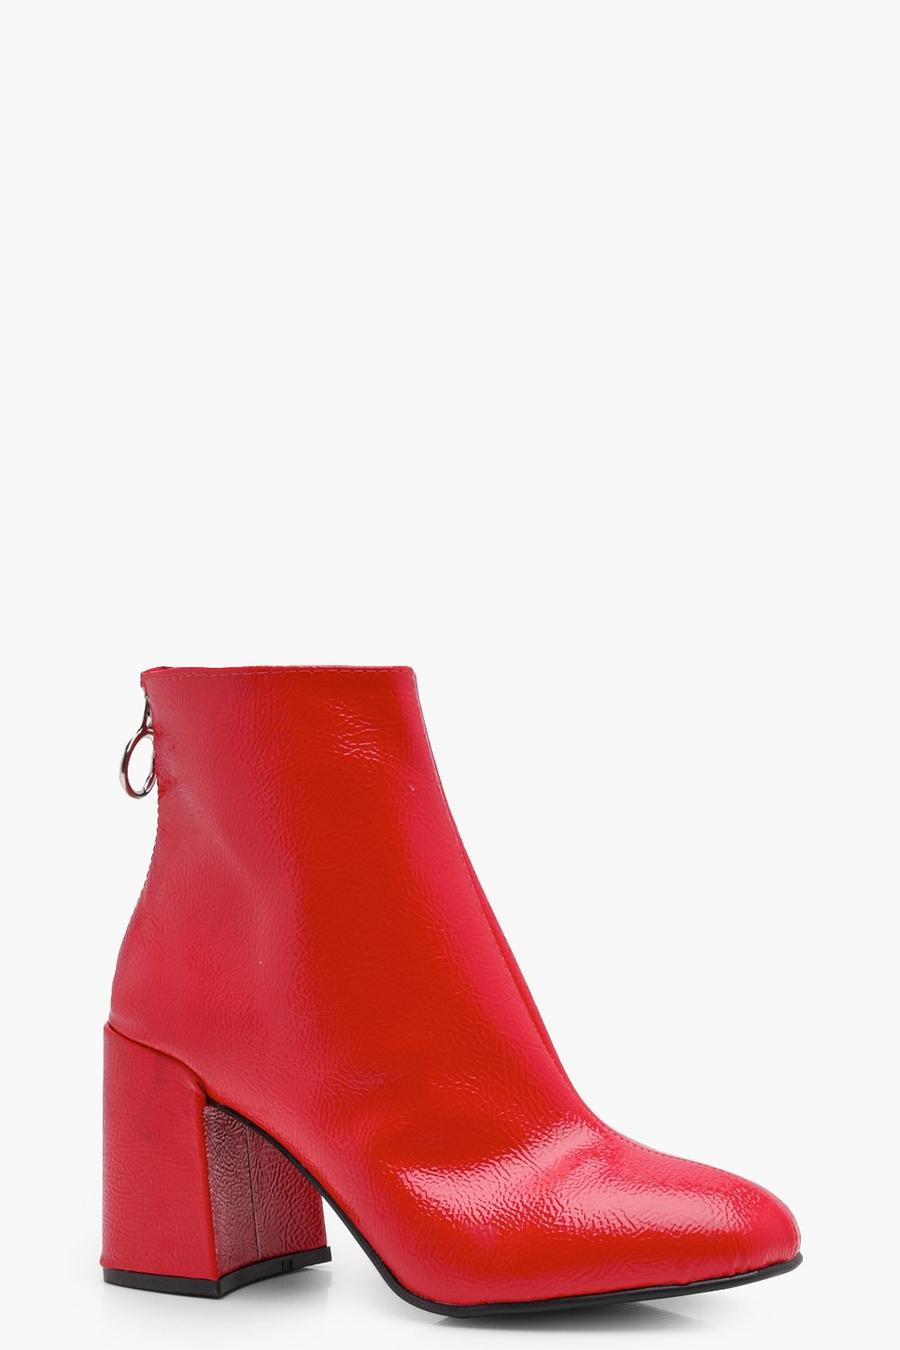 Red Patent Block Heel Ankle Shoe Boots image number 1